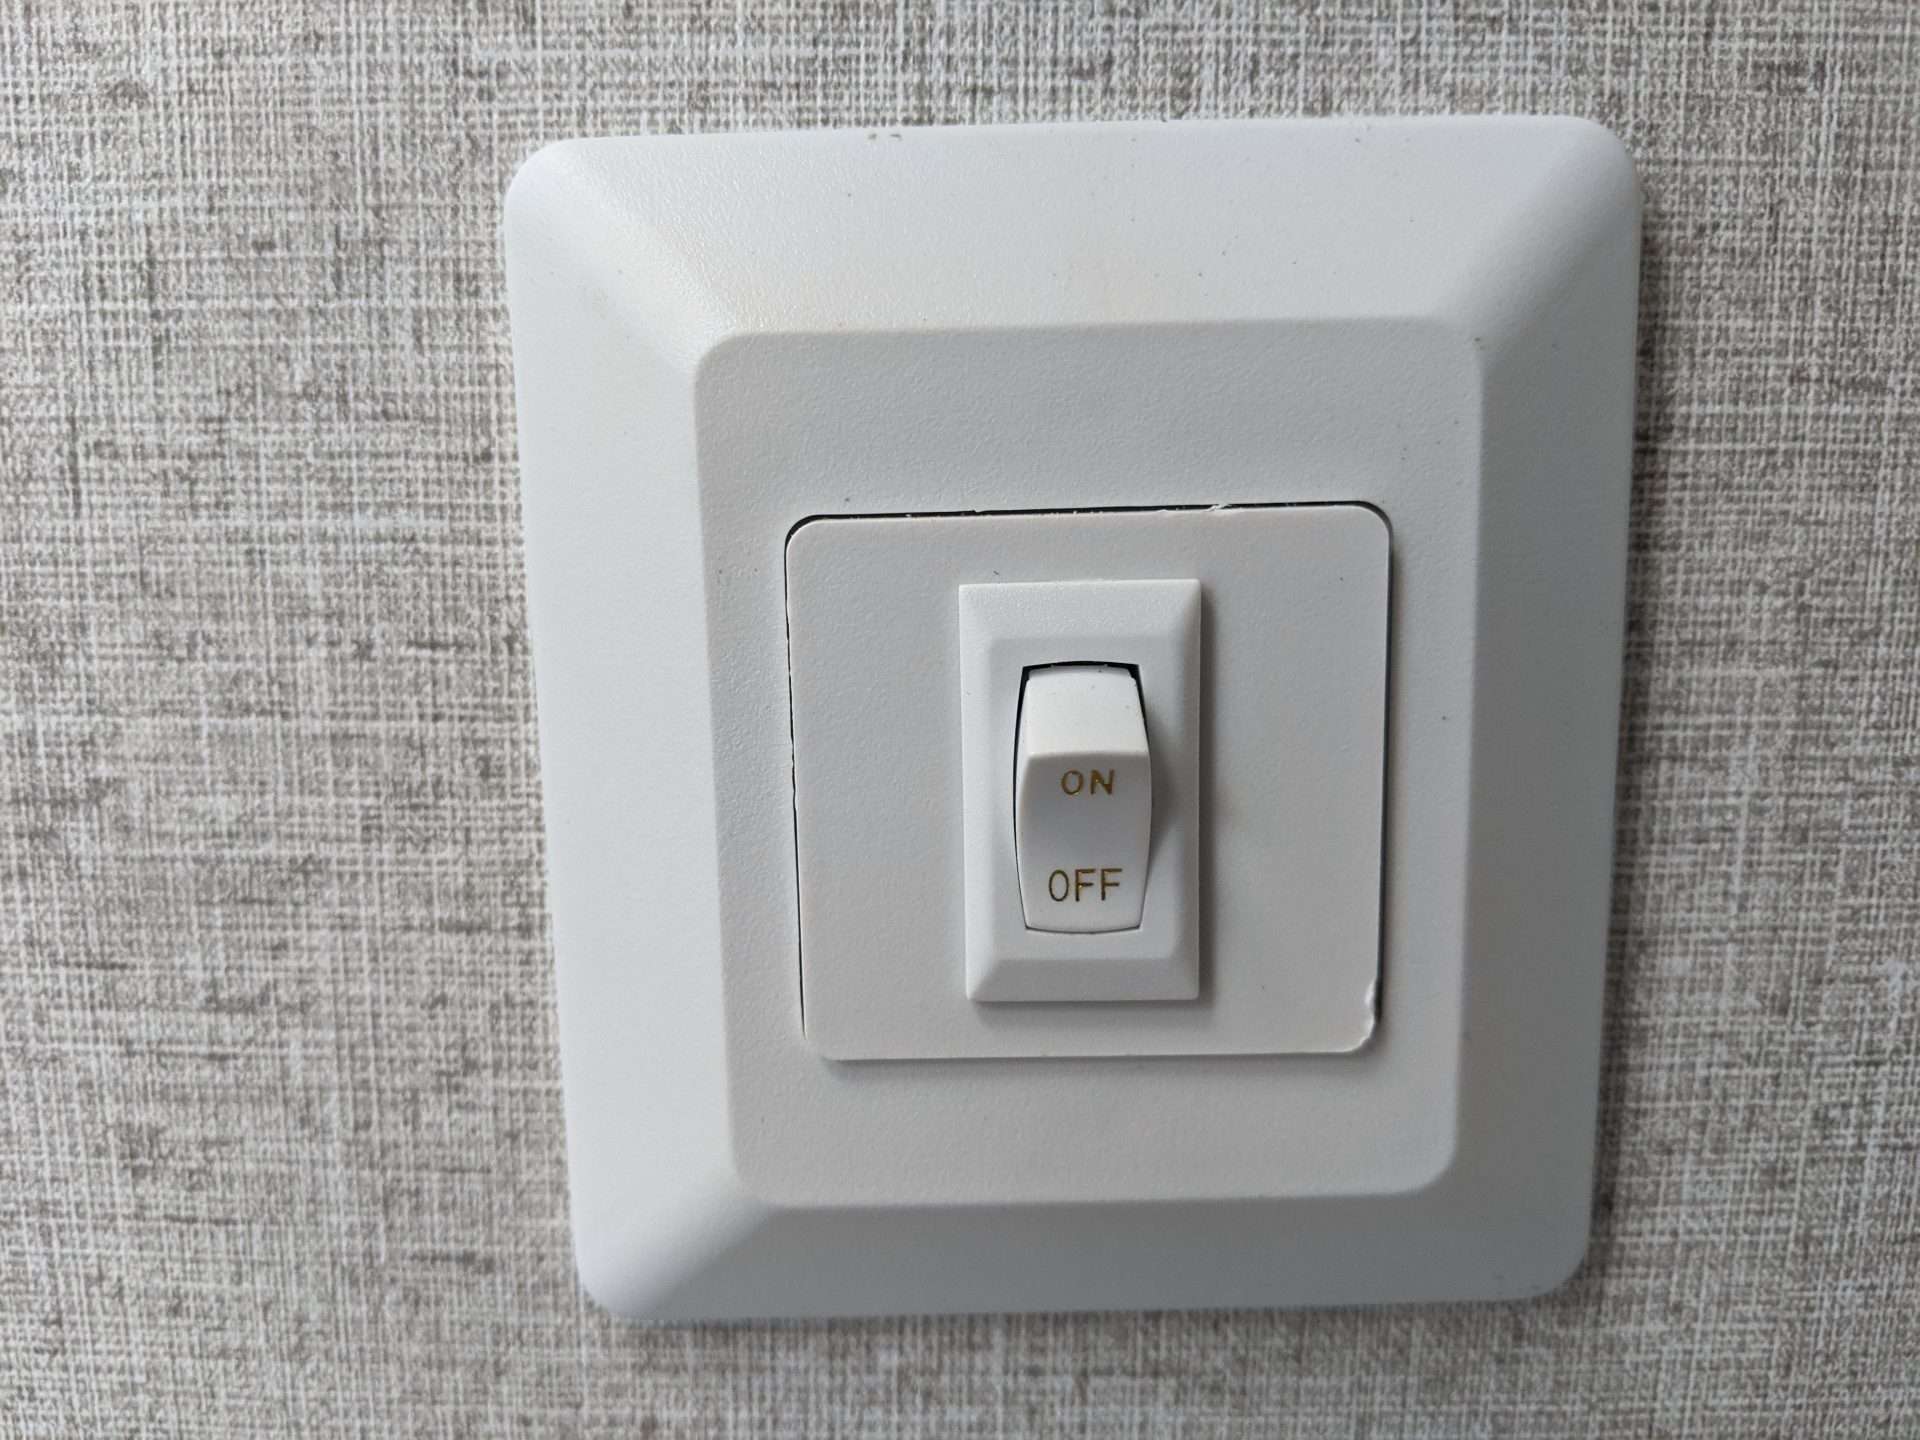 On/off switch in an RV